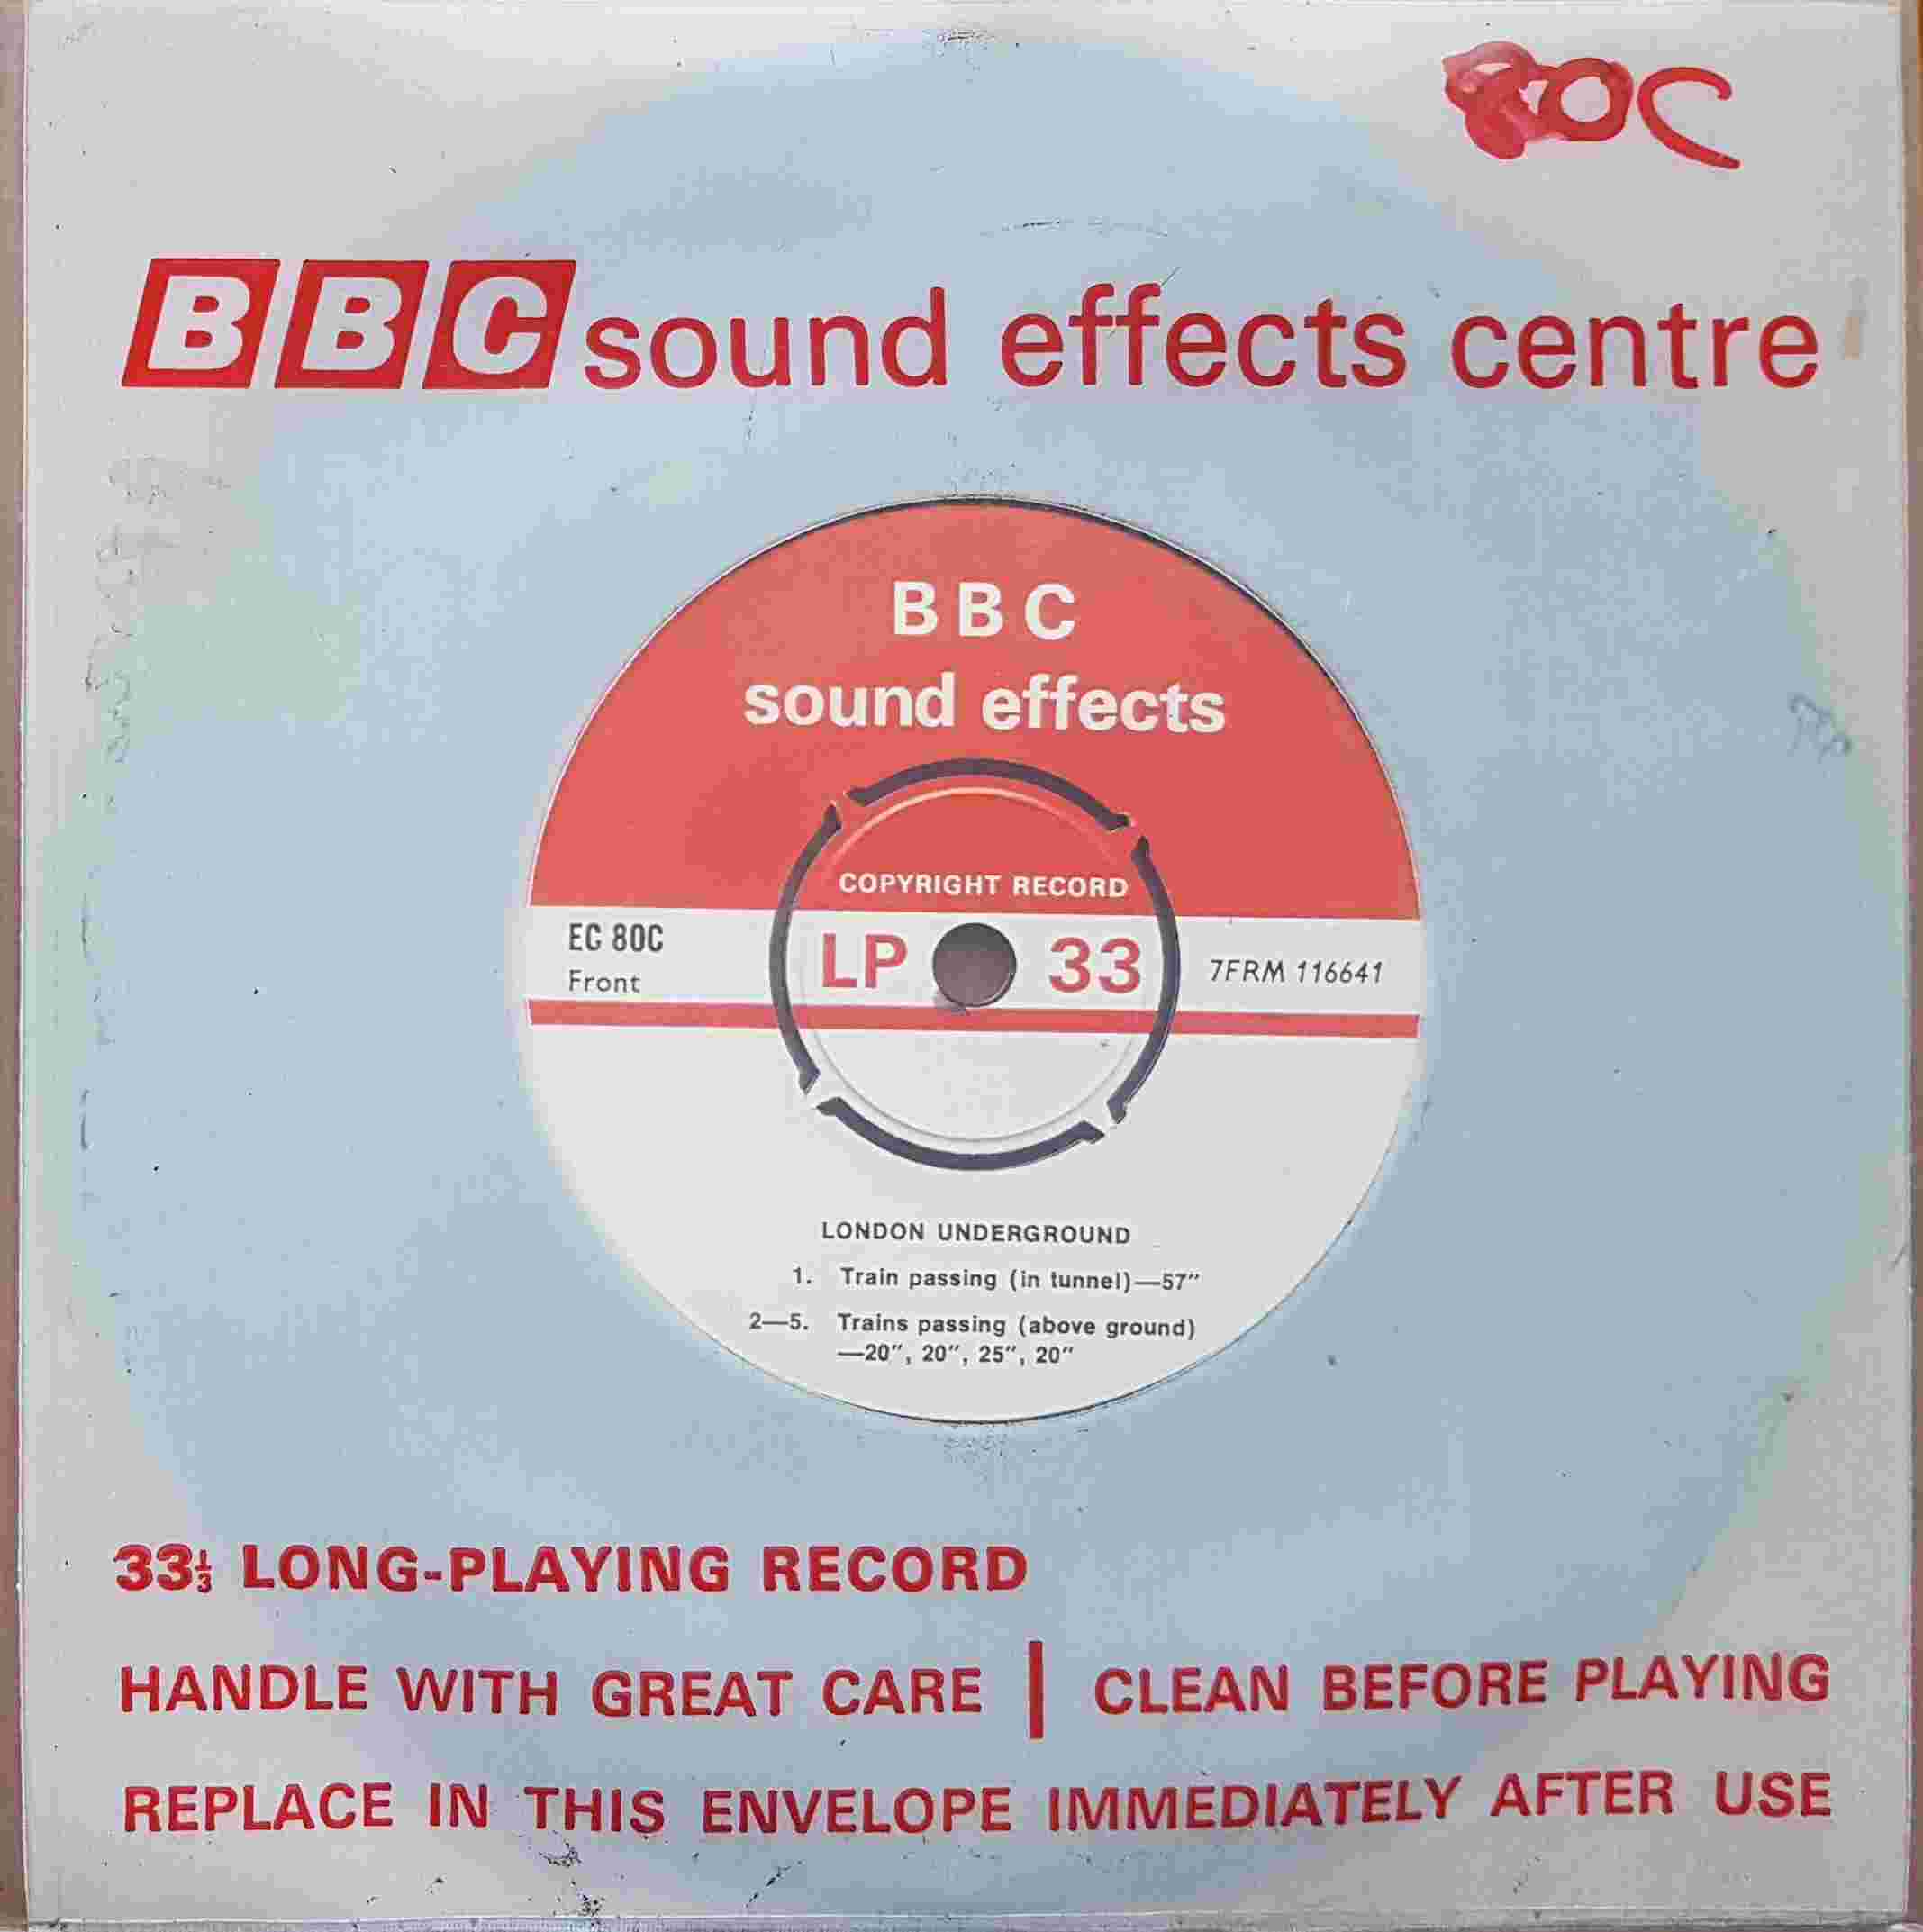 Picture of EC 80C London Underground by artist Not registered from the BBC singles - Records and Tapes library